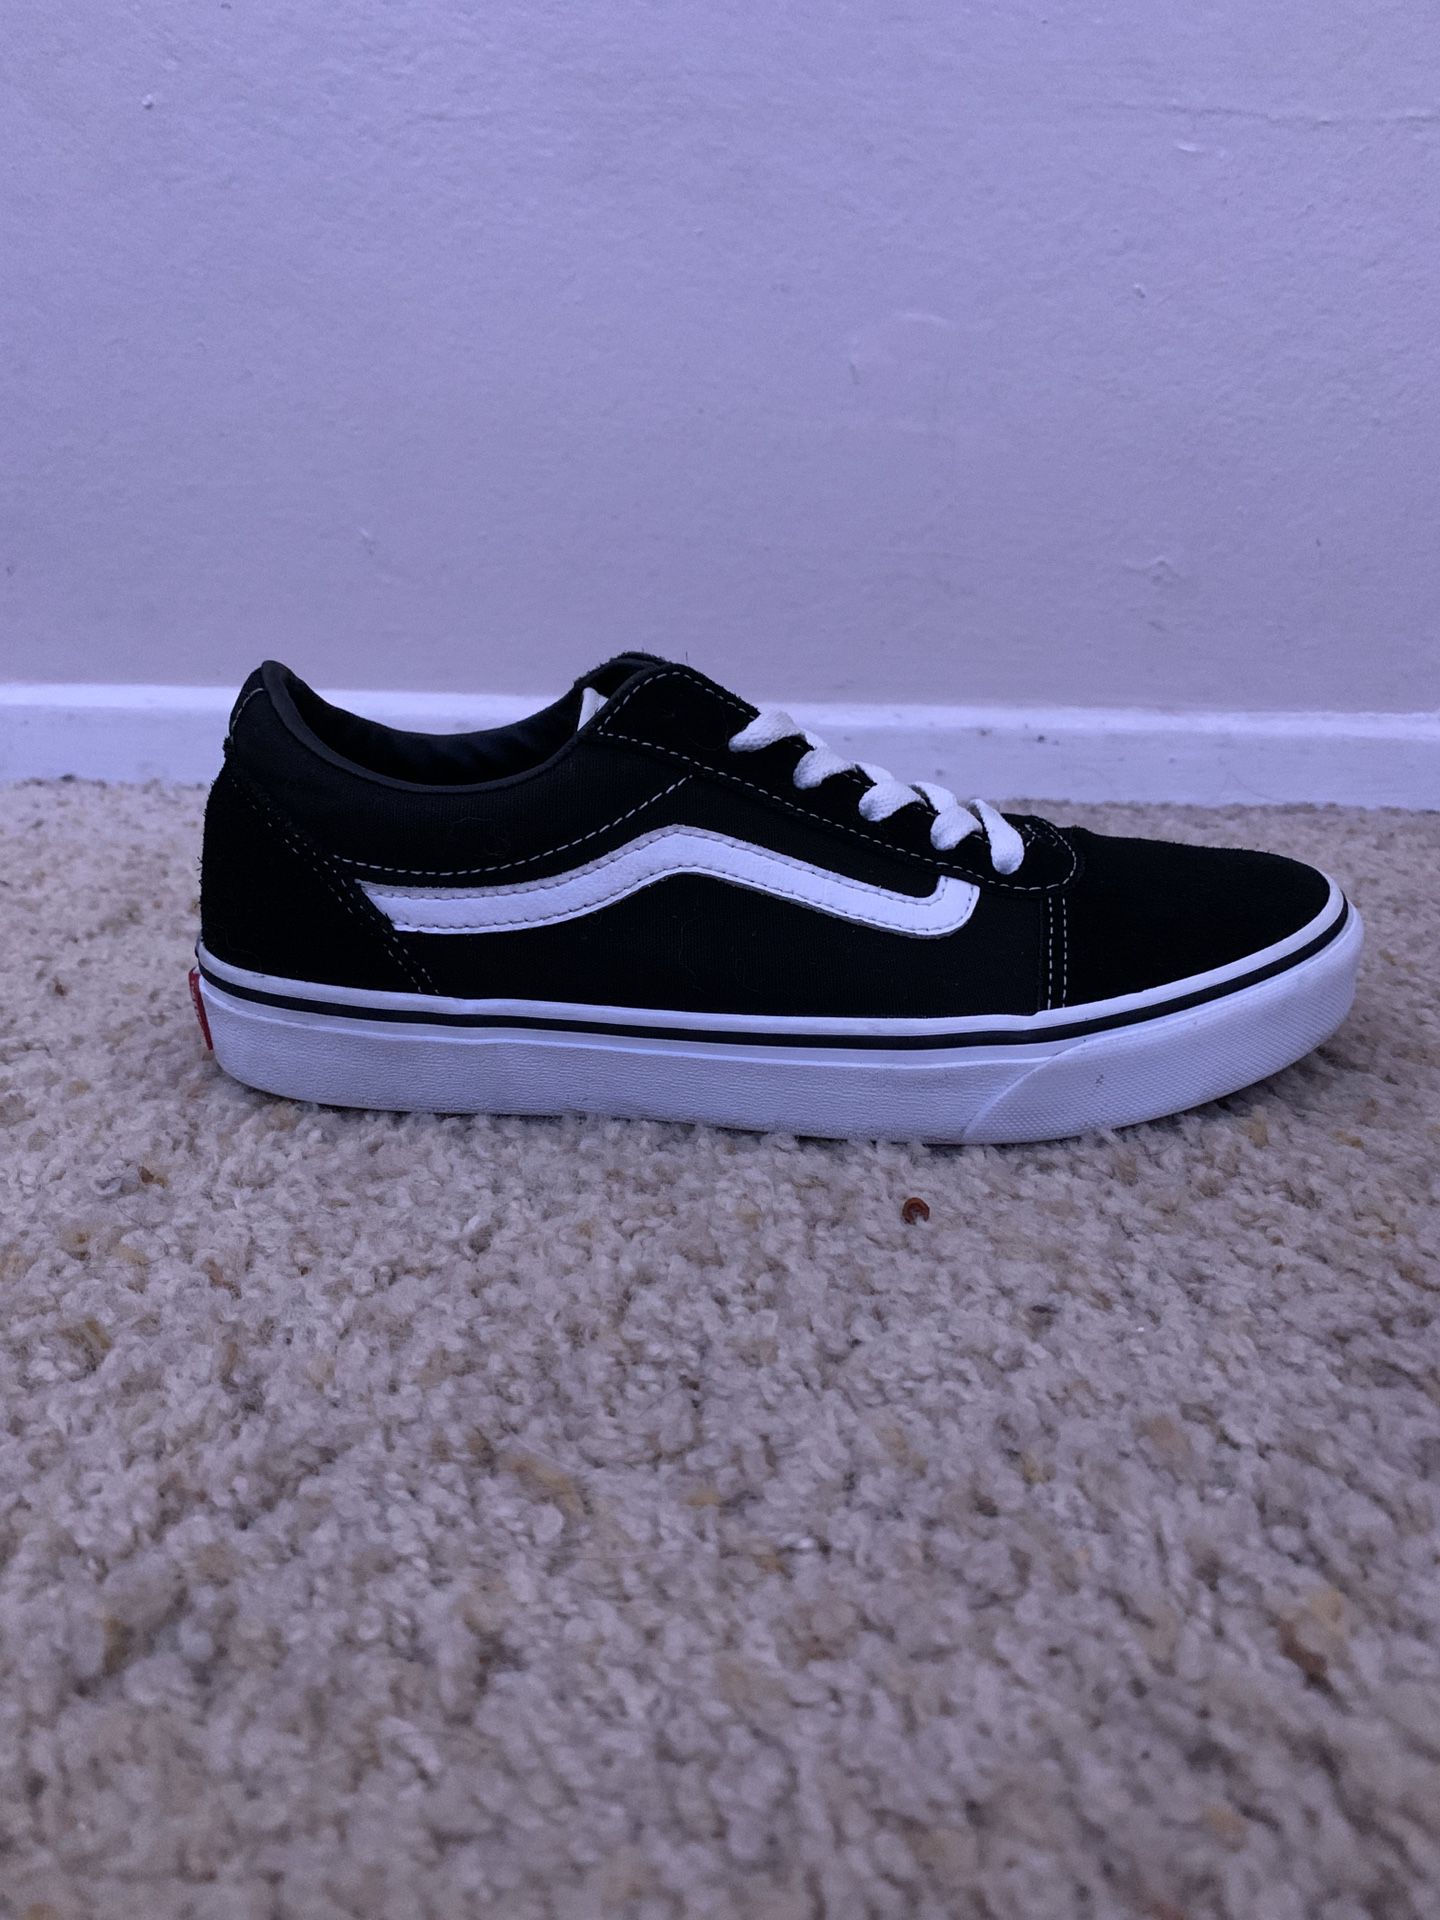 Vans shoes size 7 youth